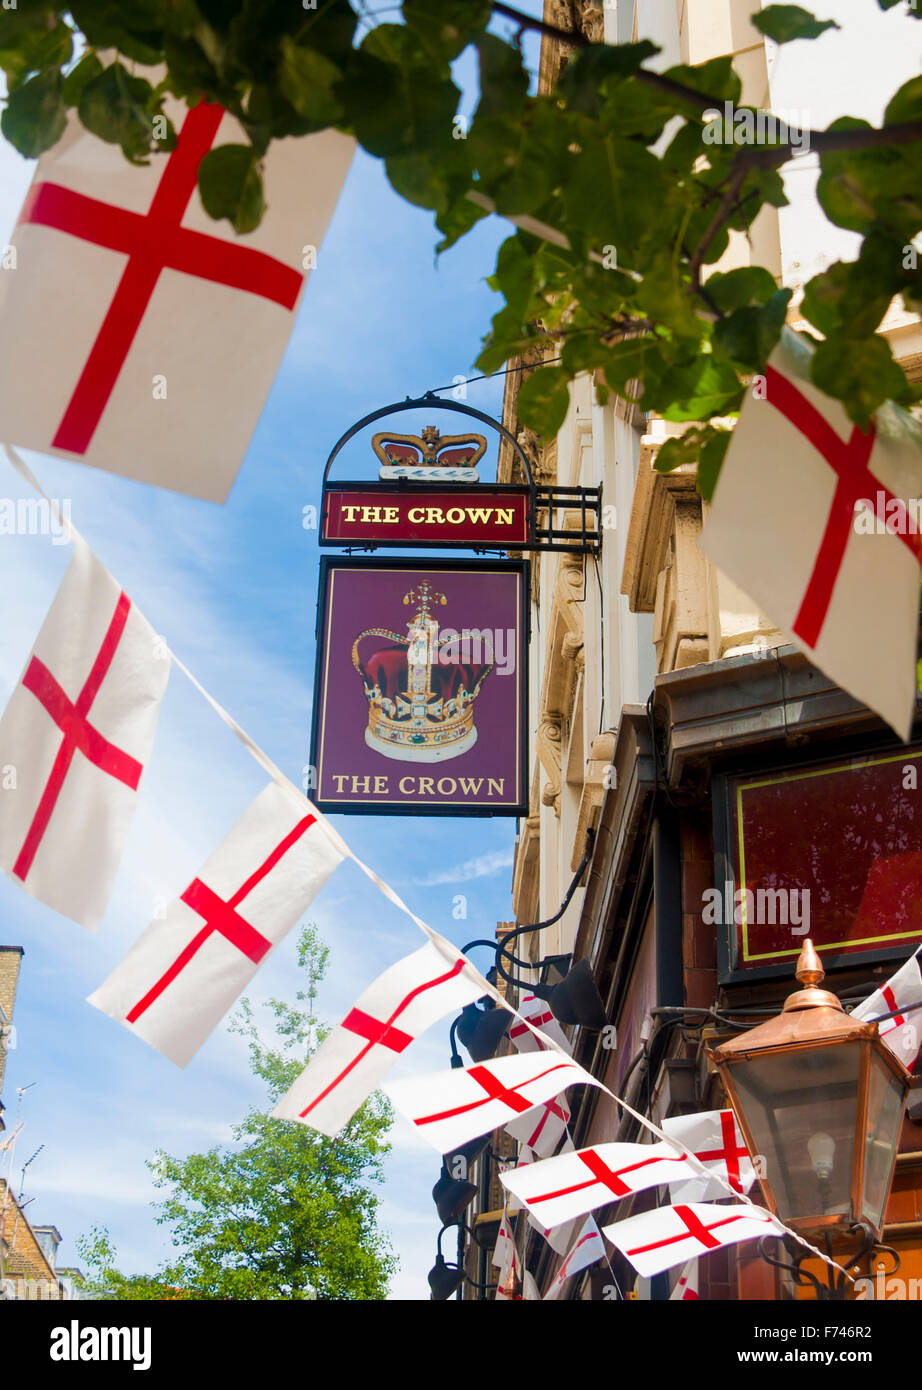 English flags St George Cross of St George flying outside The Crown pub Seven Dials Covent Garden London England UK Stock Photo